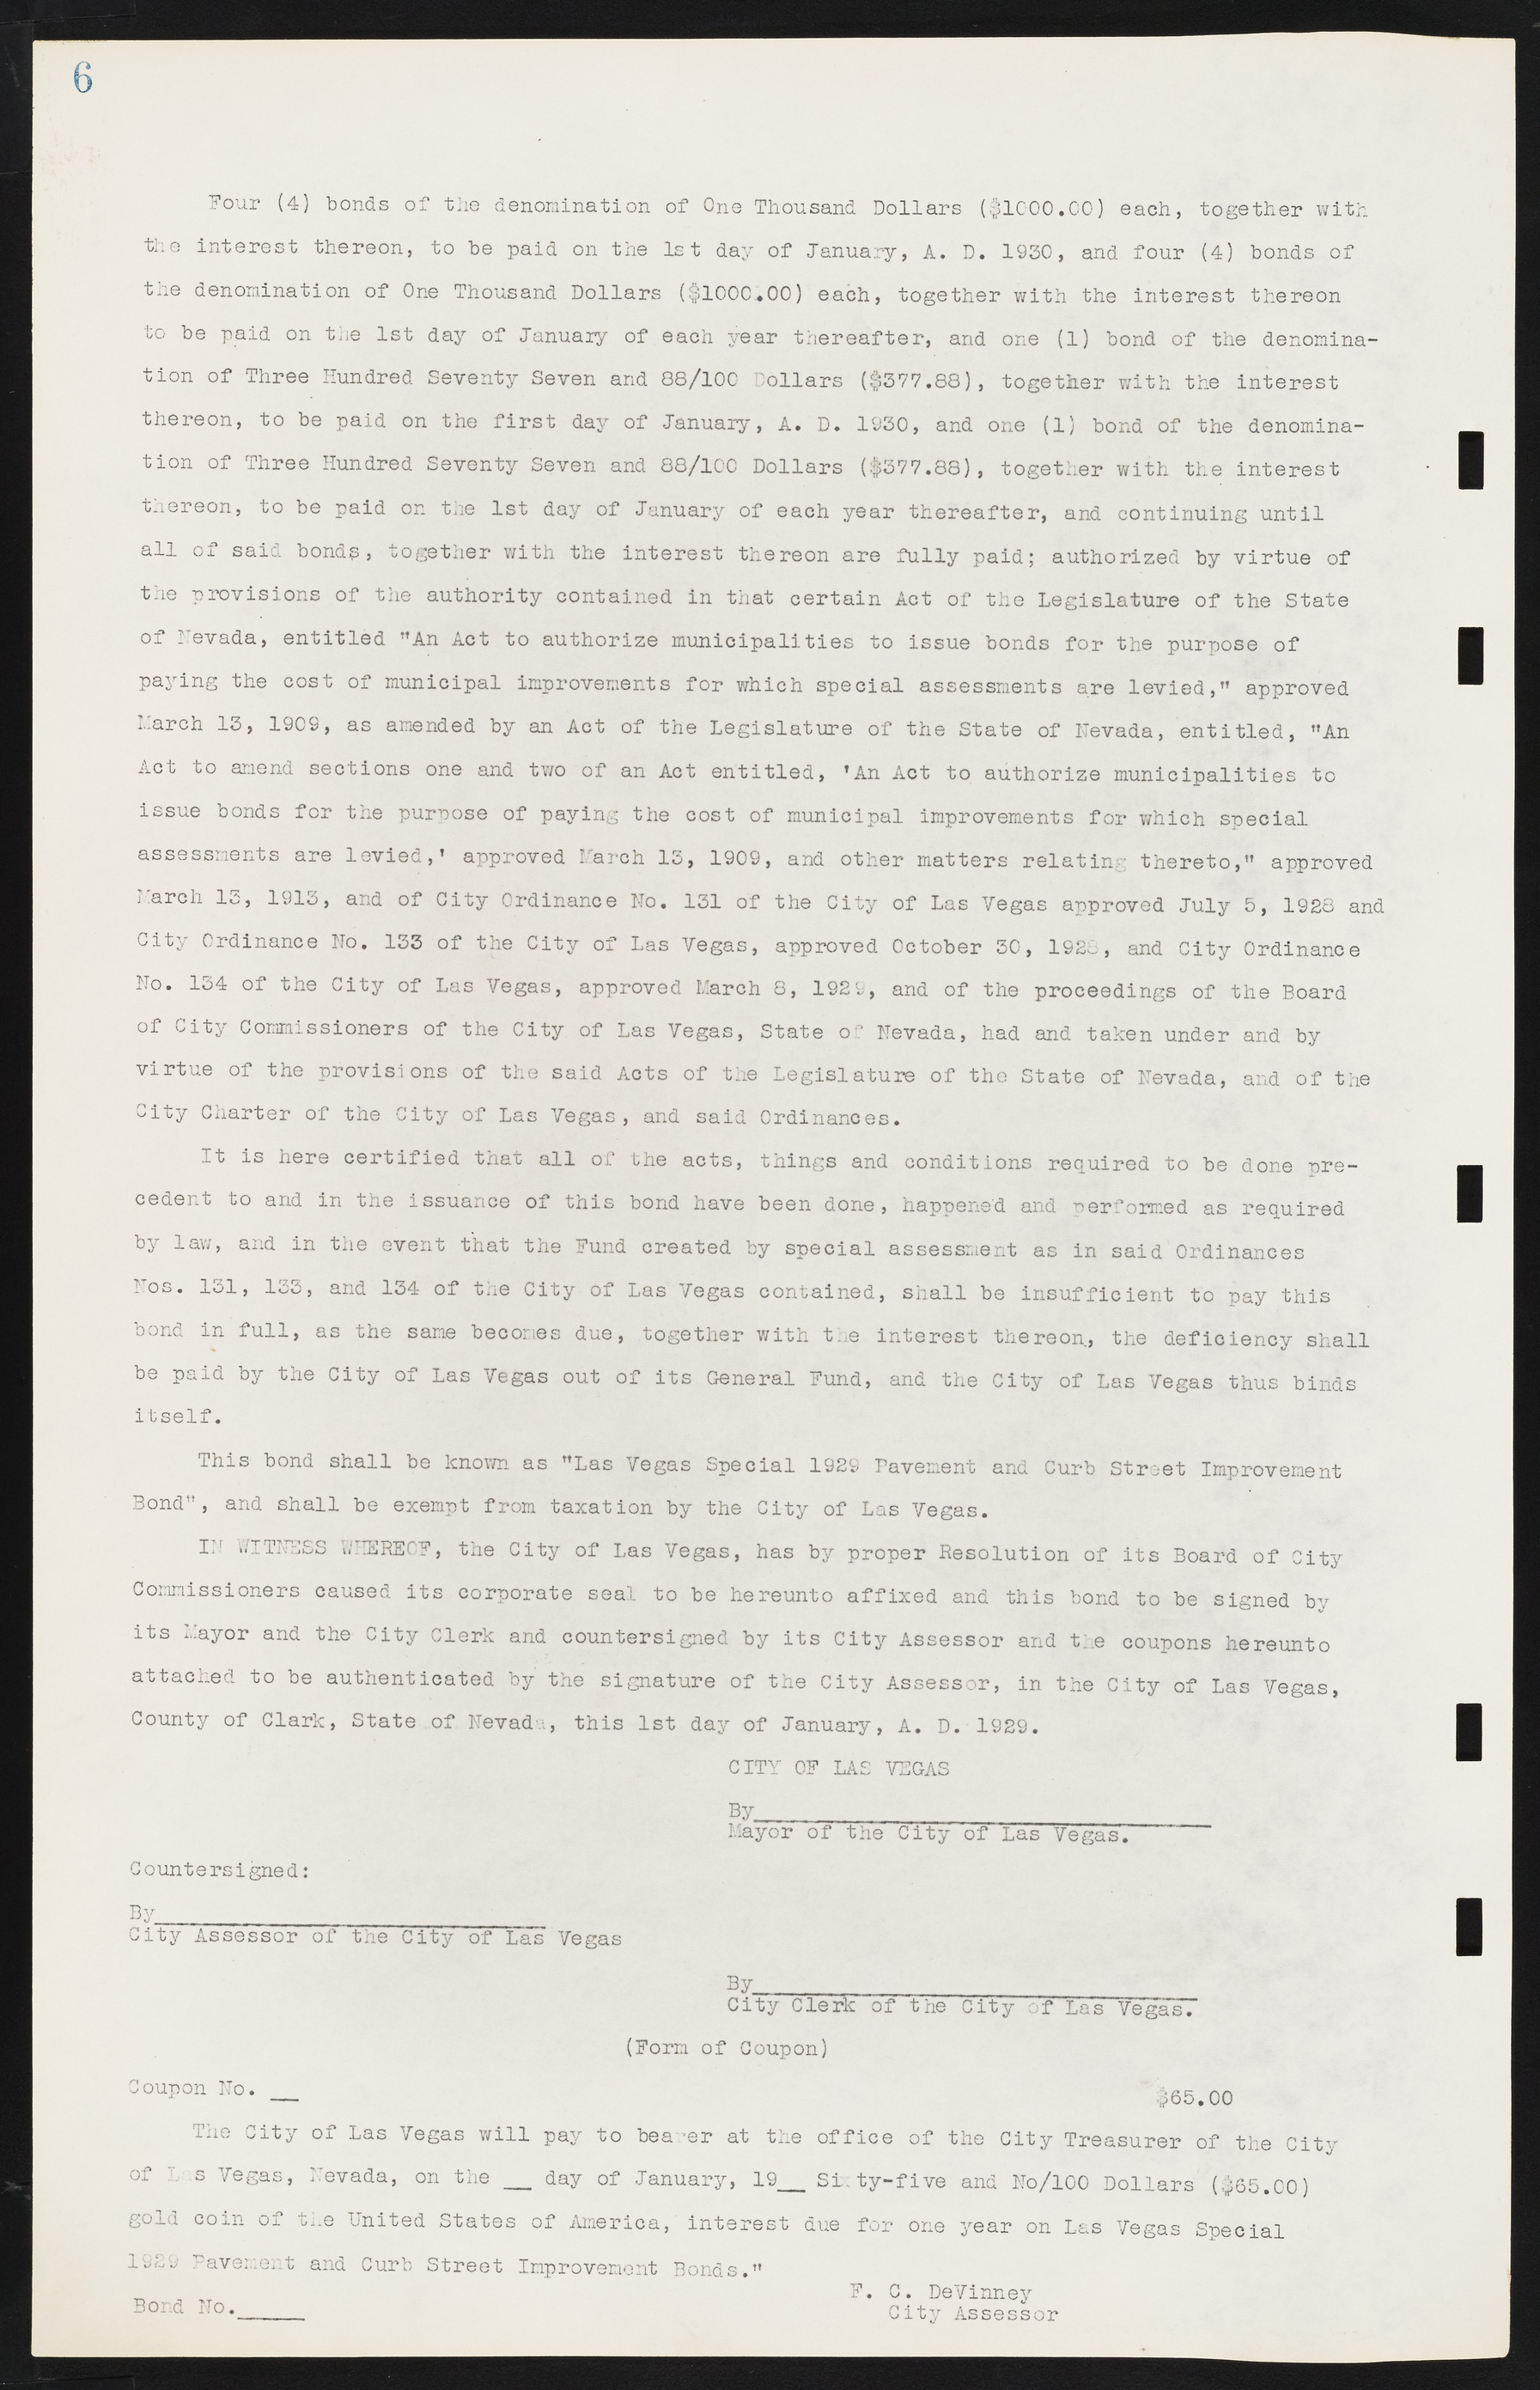 Las Vegas City Commission Minutes, May 14, 1929 to February 11, 1937, lvc000003-12